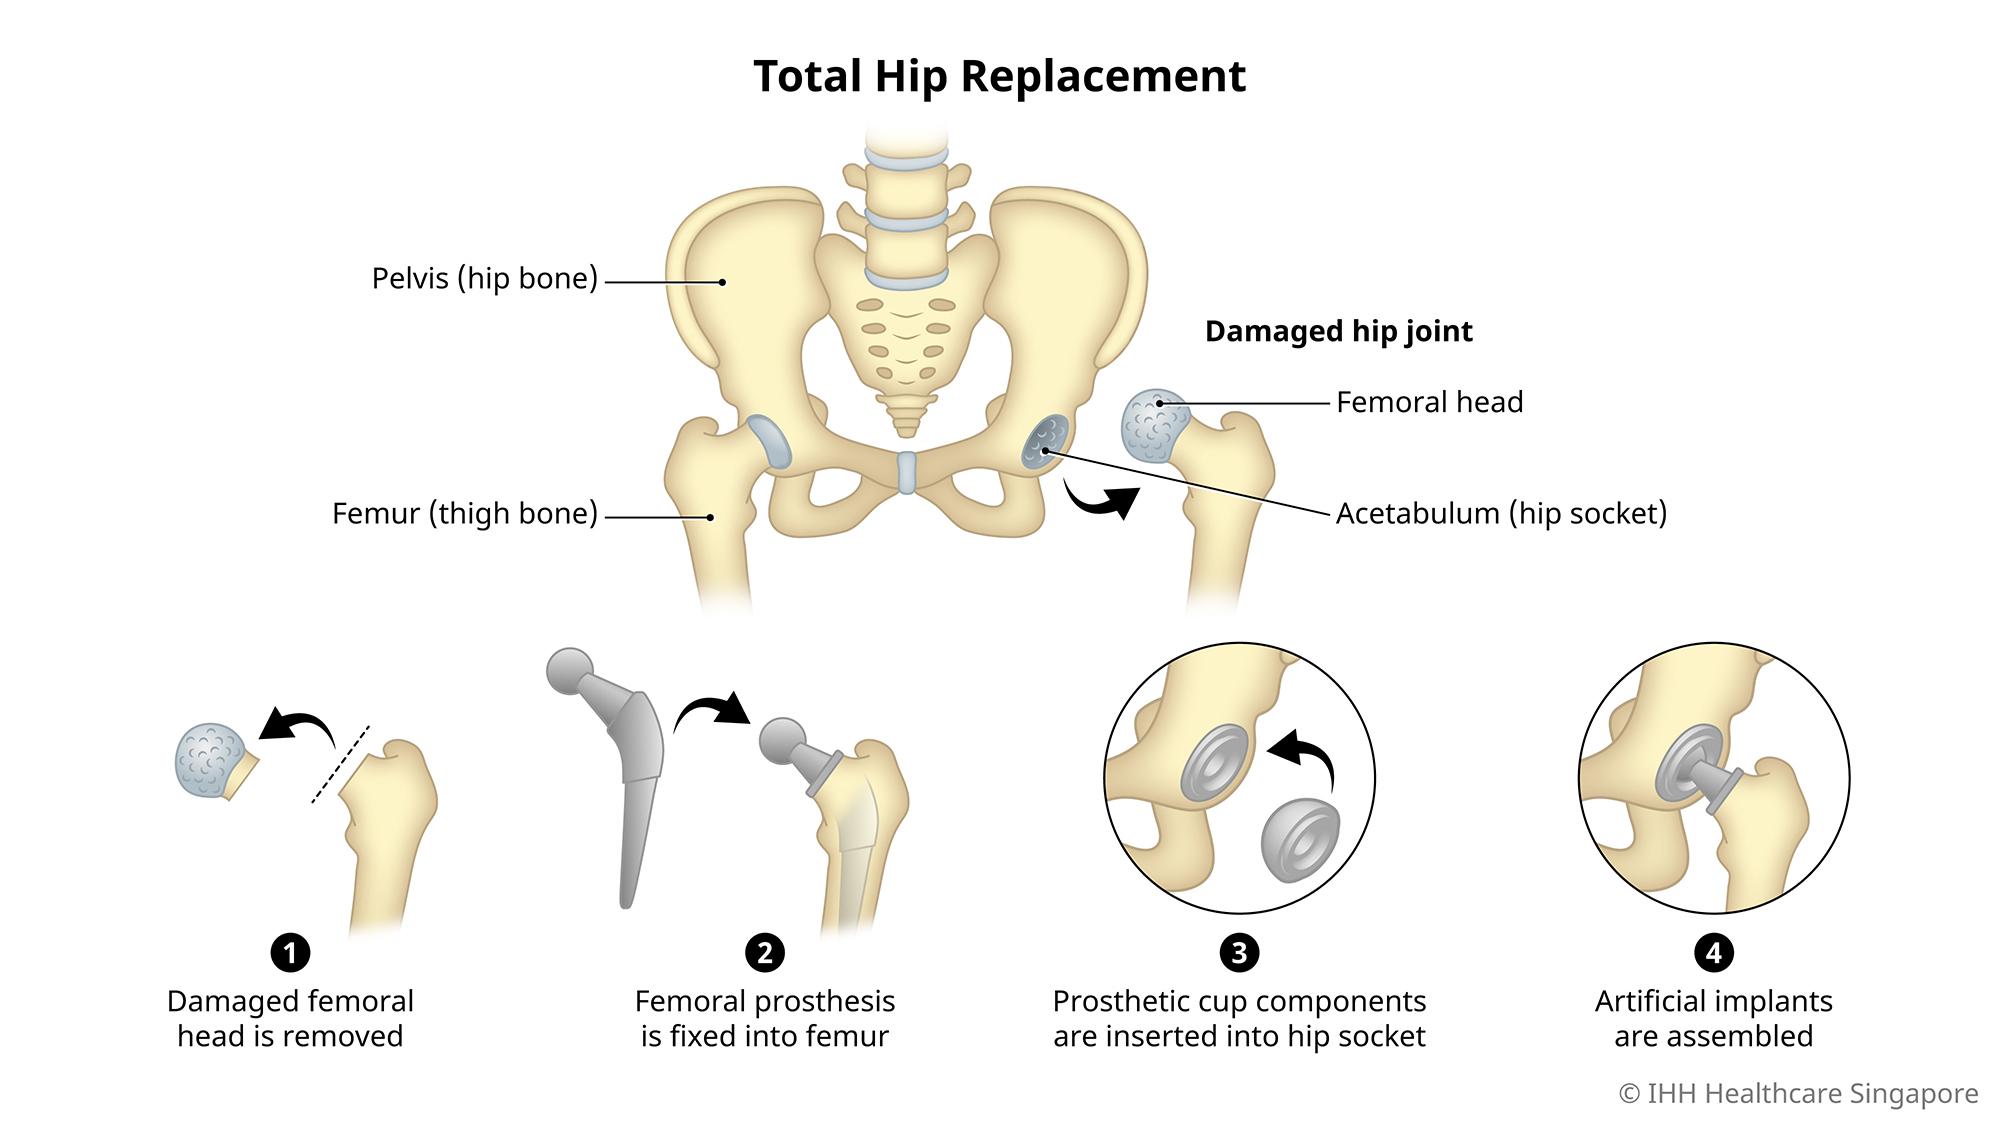 Total hip replacement replaces the femur and the acetabulum with artificial joints